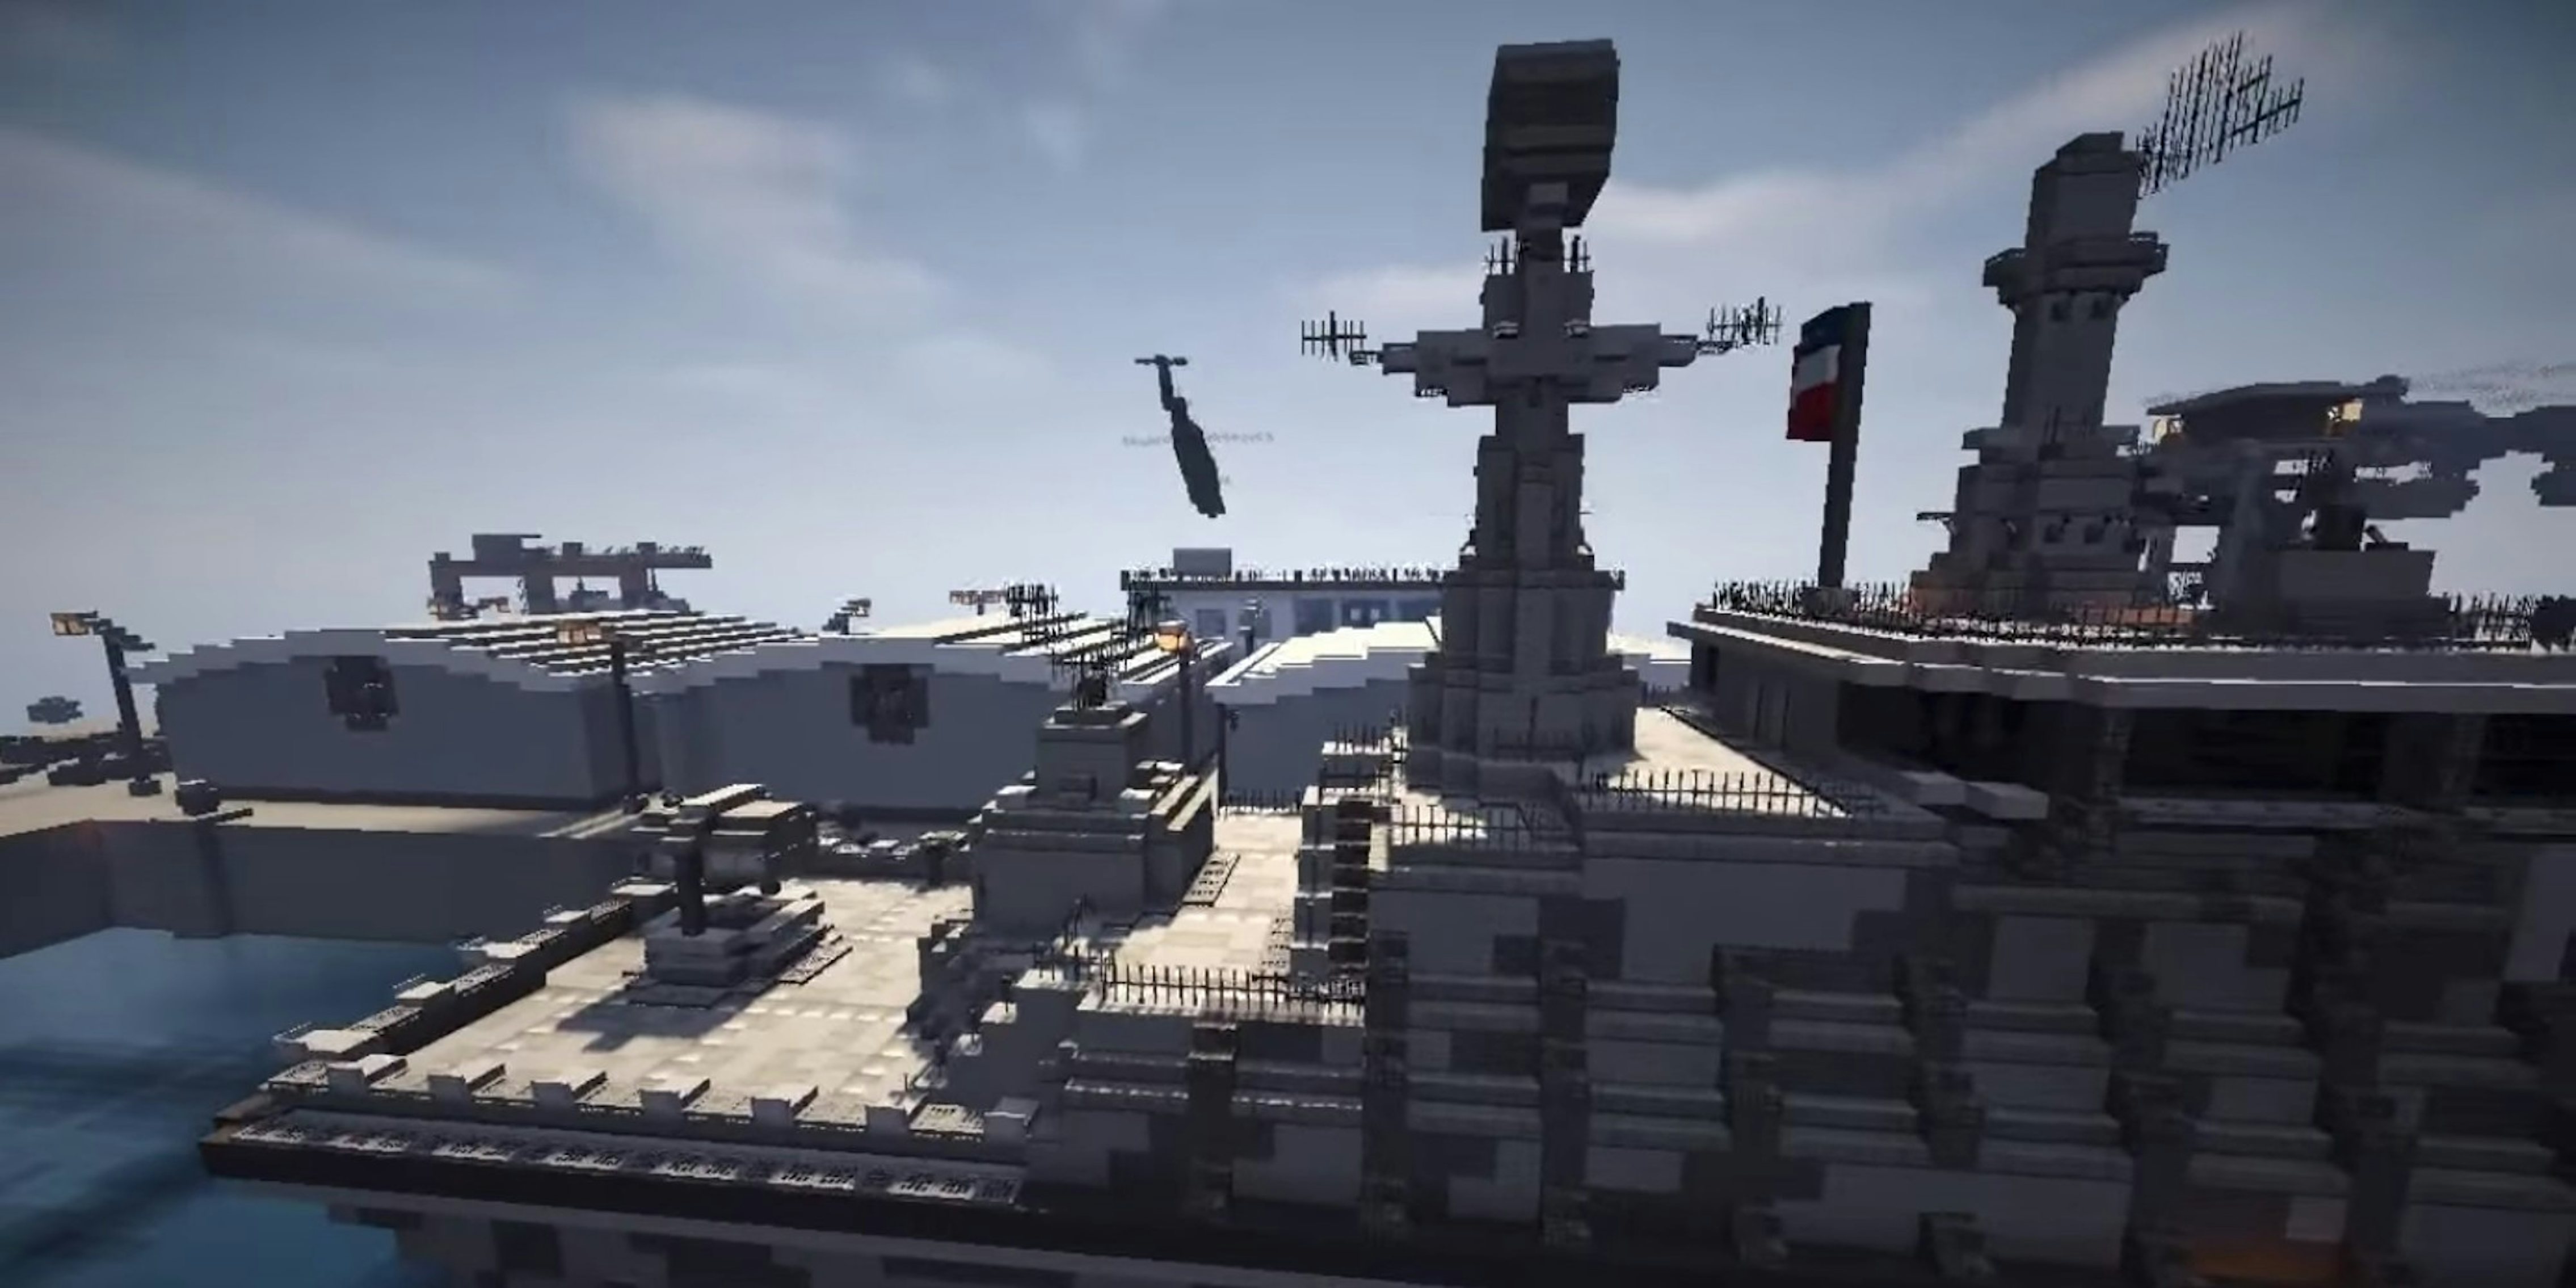 A military base in Minecraft